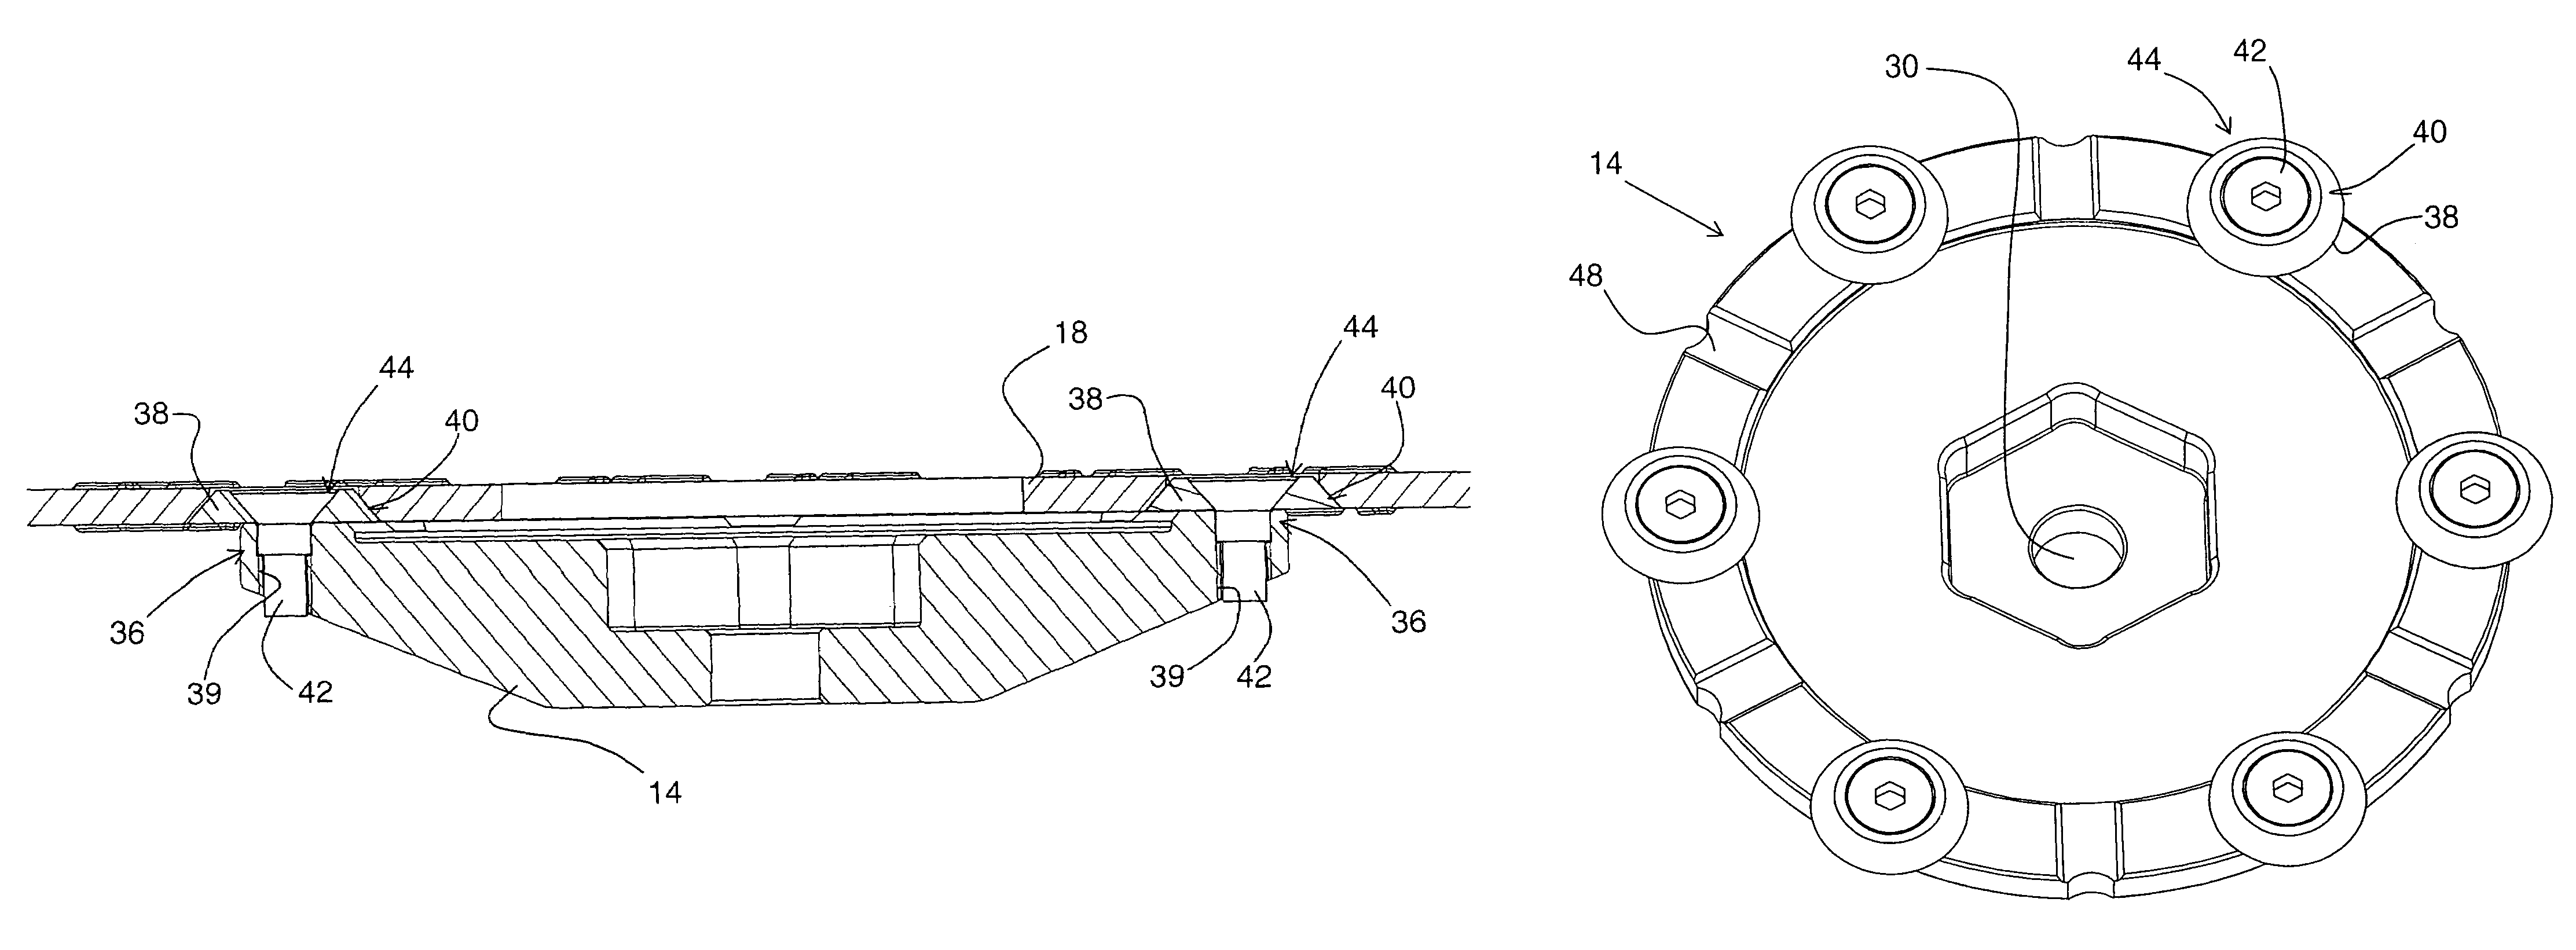 Tool holder for a disc-shaped working tool